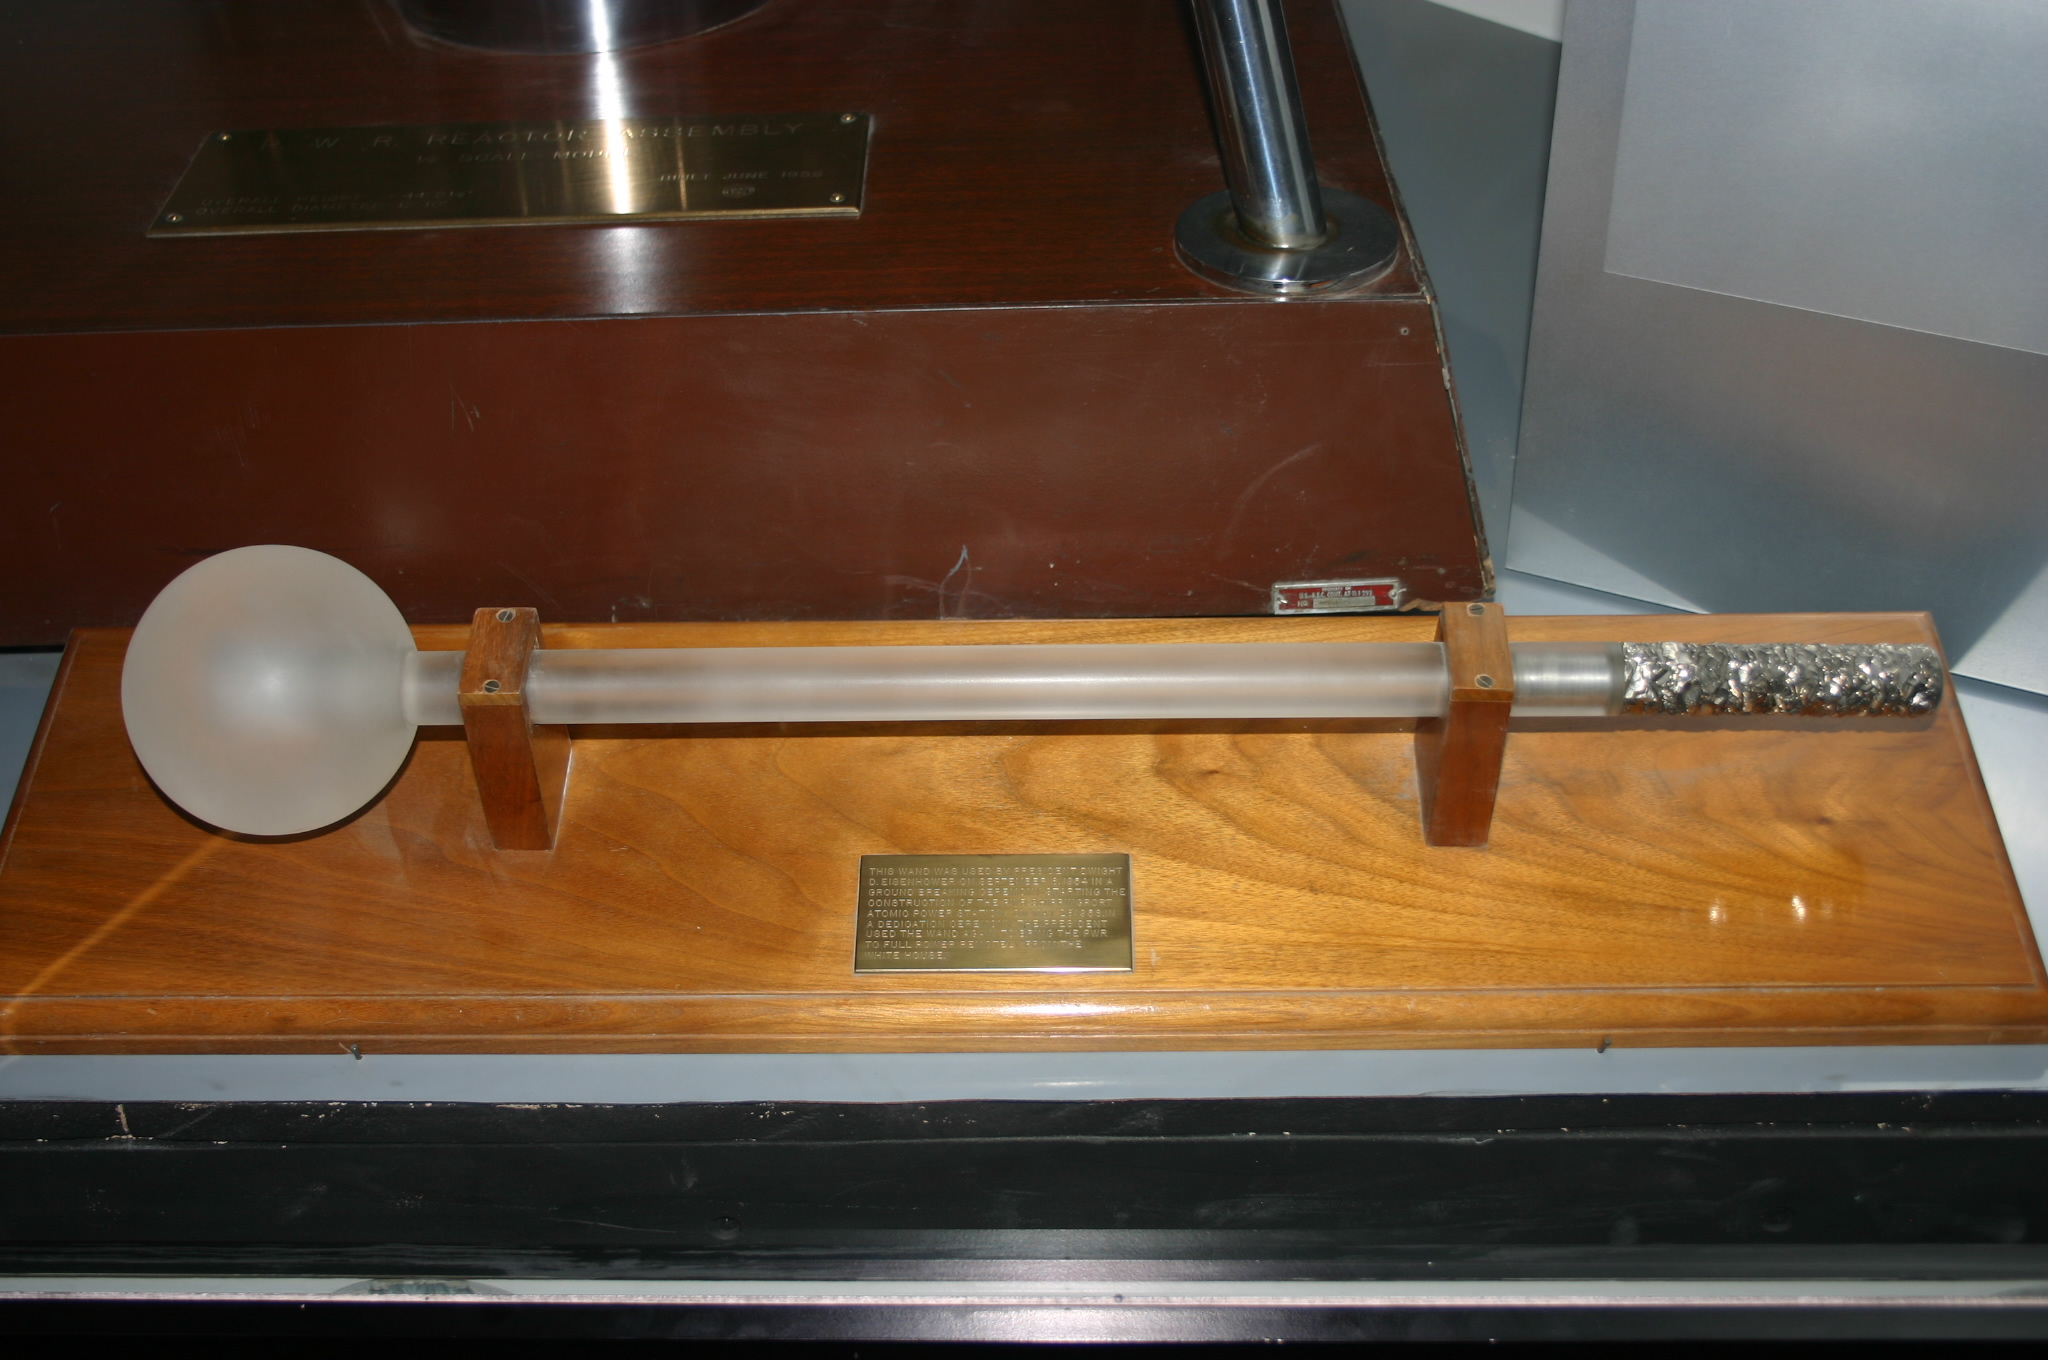 The wand that gave the signal to begin construction of the Shippingport Nuclear Plant